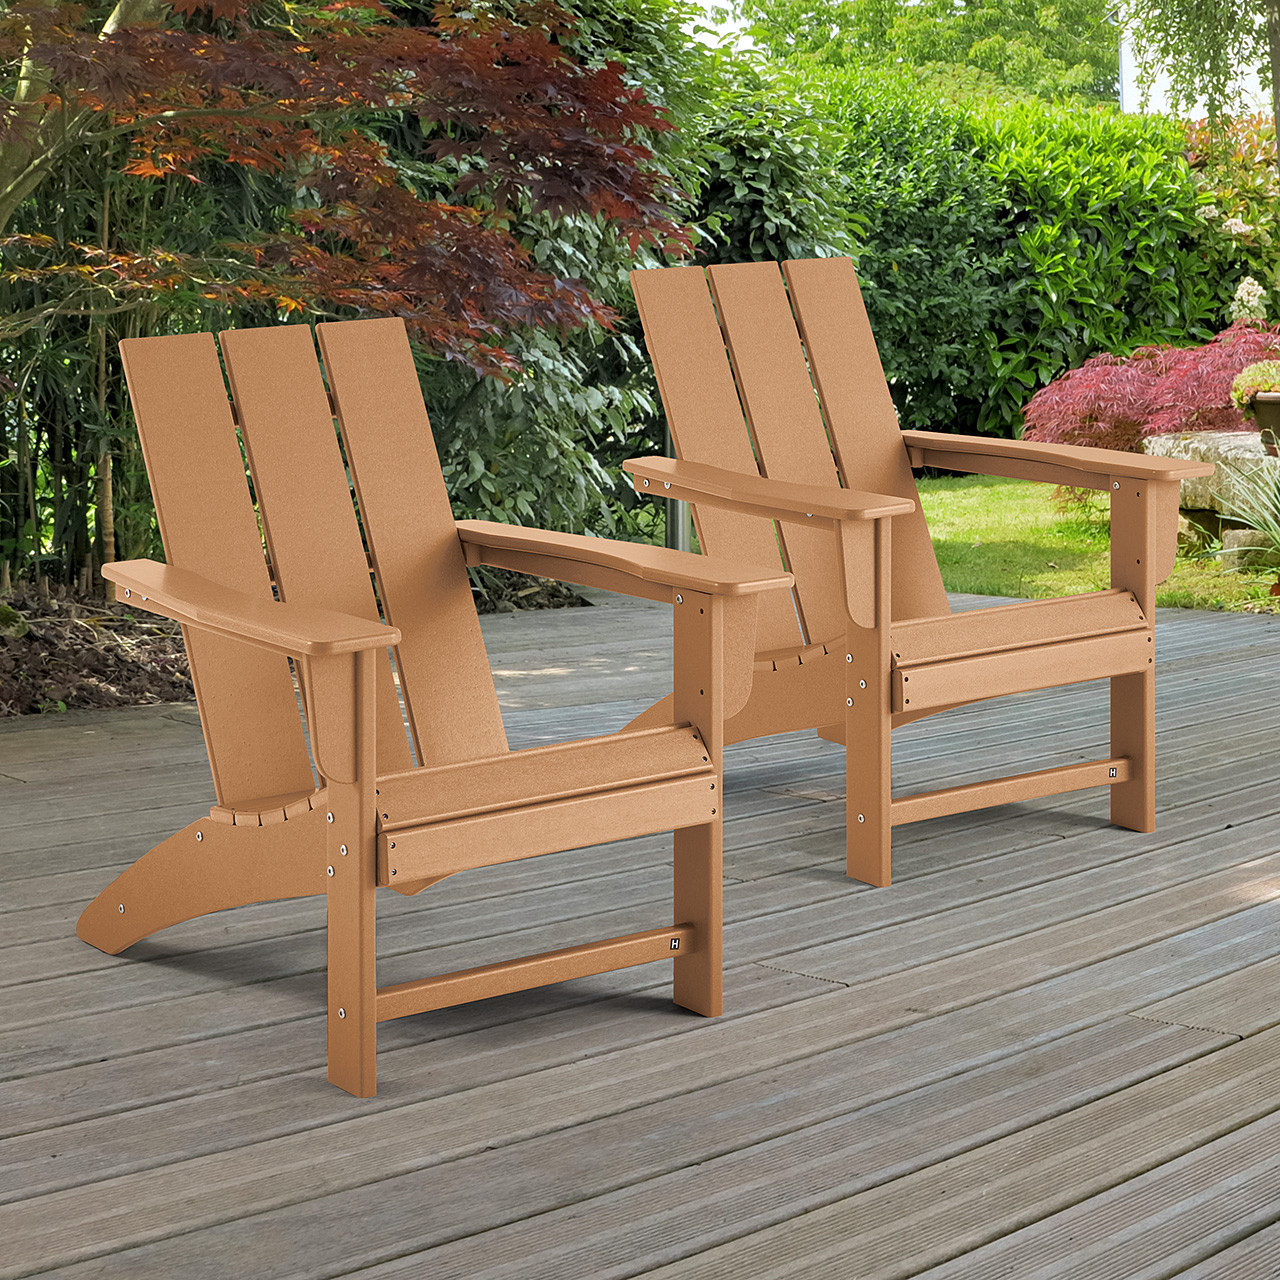 https://cdn11.bigcommerce.com/s-mm9ficts64/images/stencil/1280x1280/products/51233/133413/modern-2pc-adirondack-set-brown-1__76258.1685104194.jpg?c=1&imbypass=on